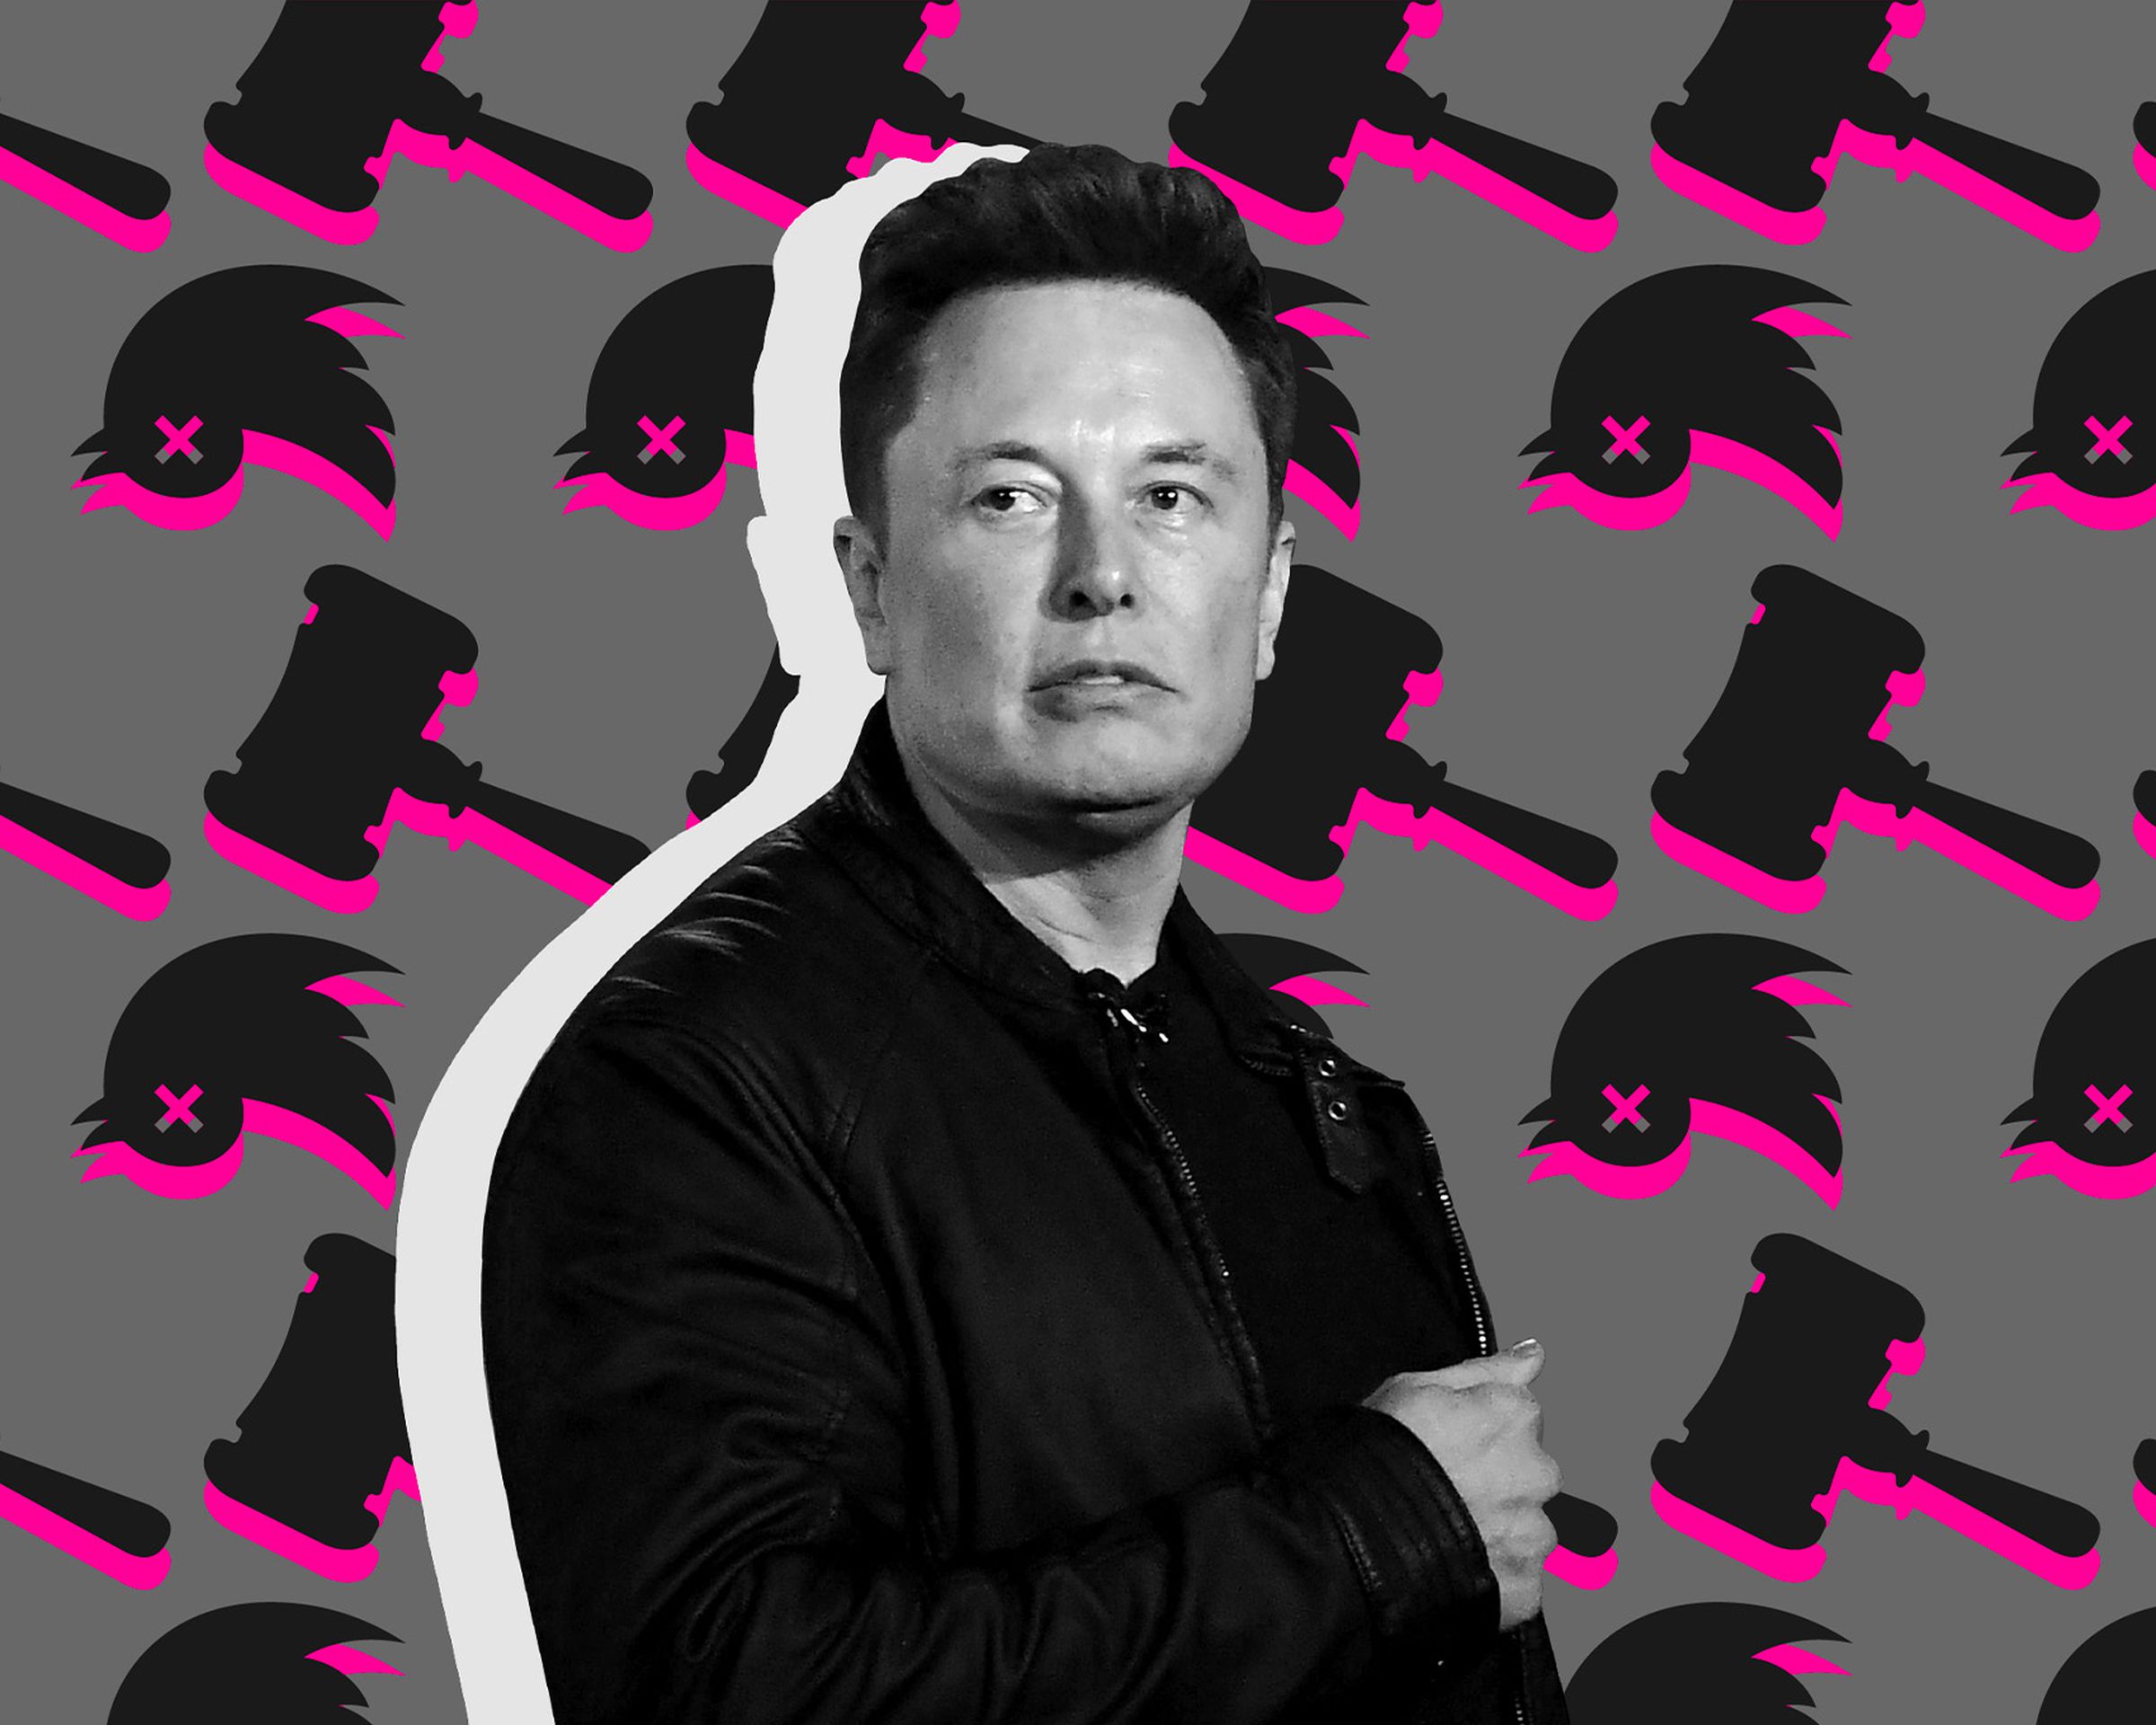 An image showing Elon Musk on a background with hammers